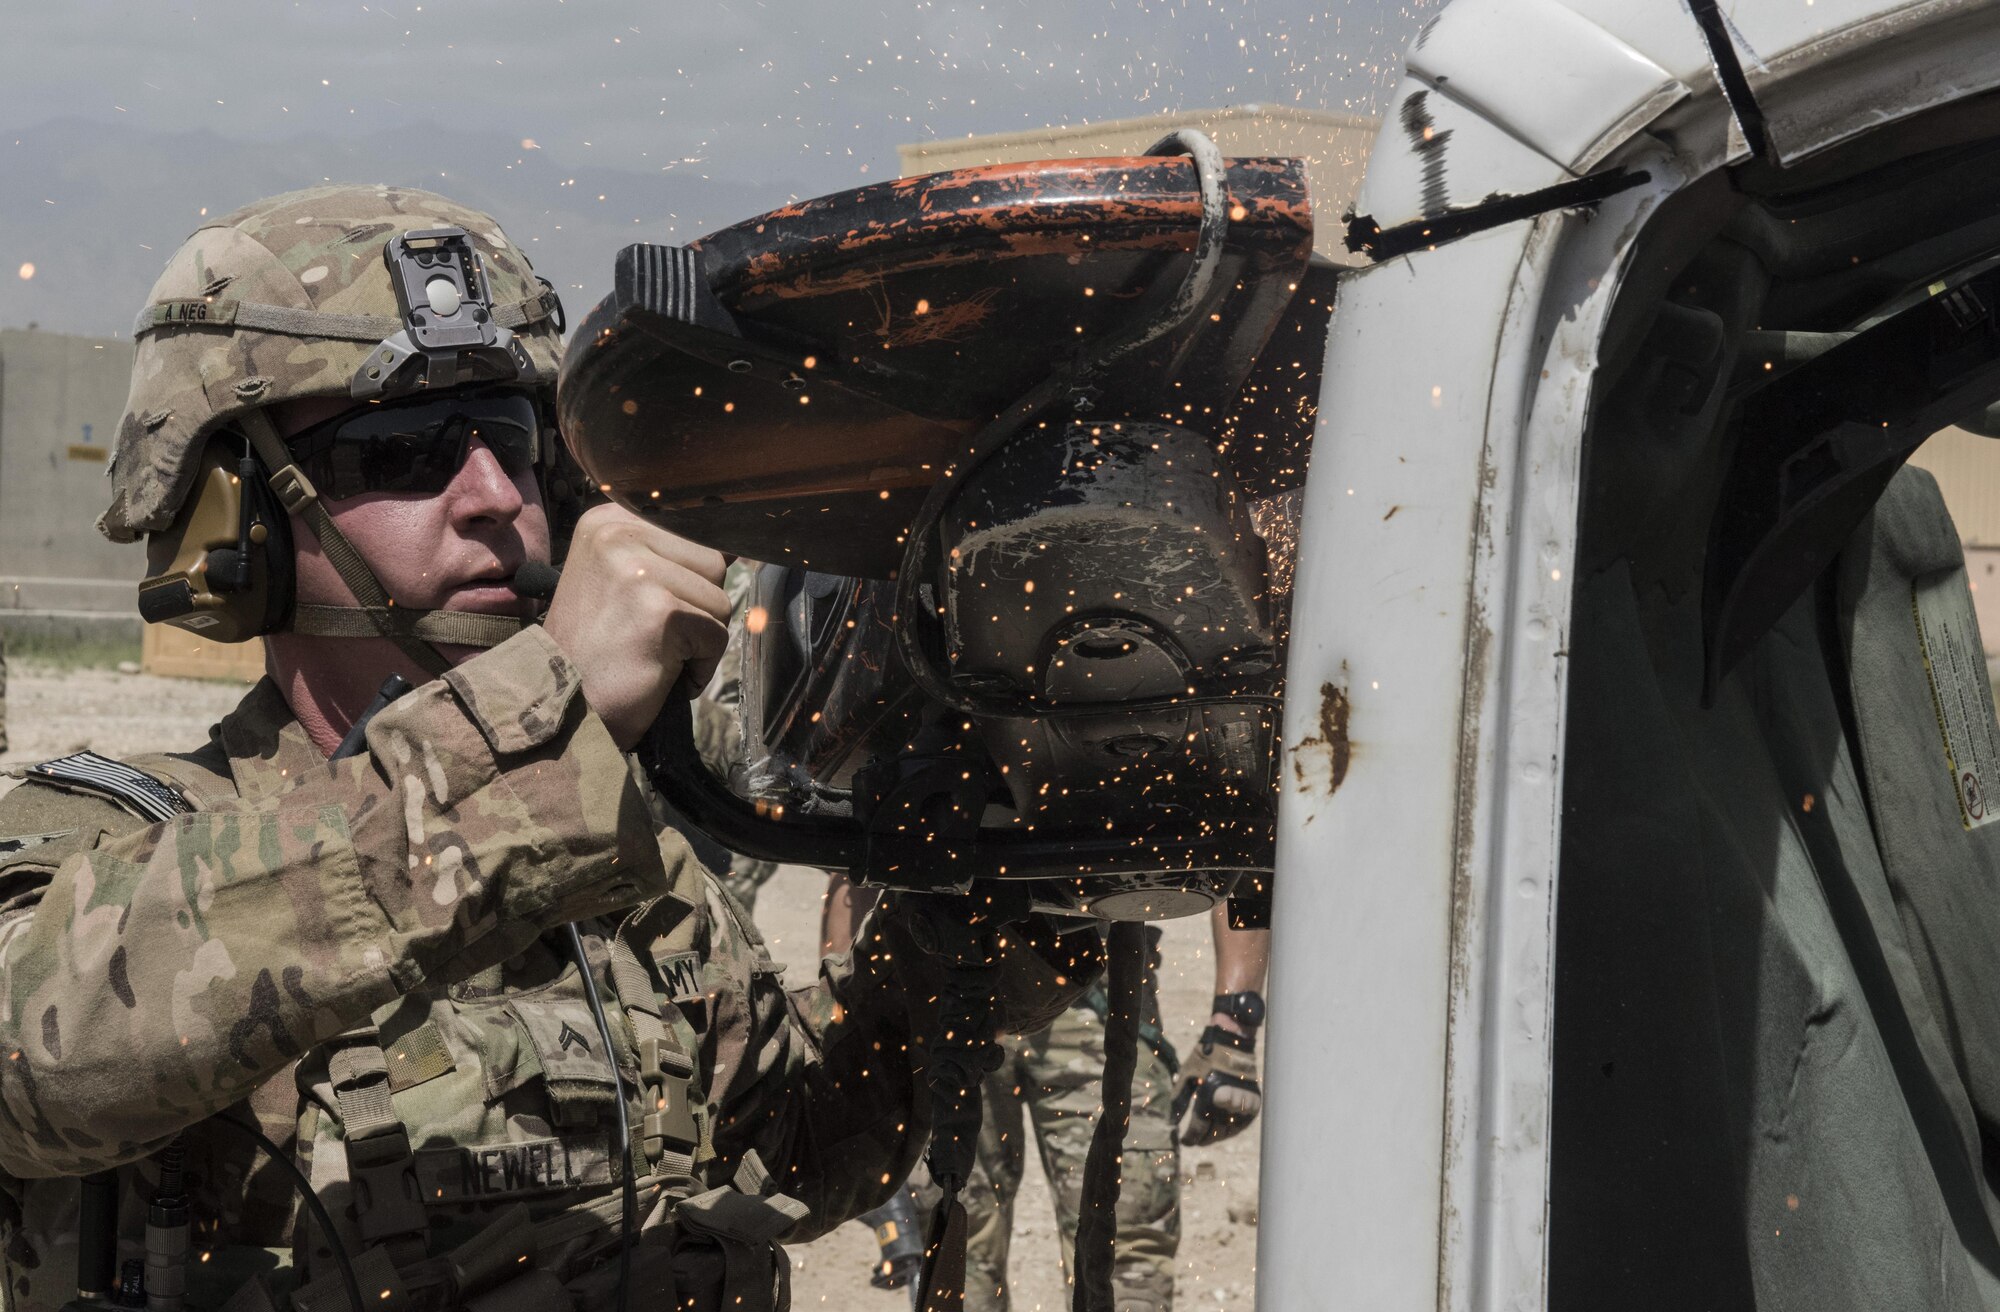 A U.S. Army soldier with Task Force Chosen, cuts the hood of a van during a joint mass casualty and extraction exercise, June 16, 2016 at Bagram Airfield, Afghanistan. Task Force Chosen paired with the 83rd Expeditionary Rescue Squadron to increase interoperability with each other and demonstrate theater personnel recovery capabilities. (U.S. Air Force photo by Tech. Sgt. Tyrona Lawson)